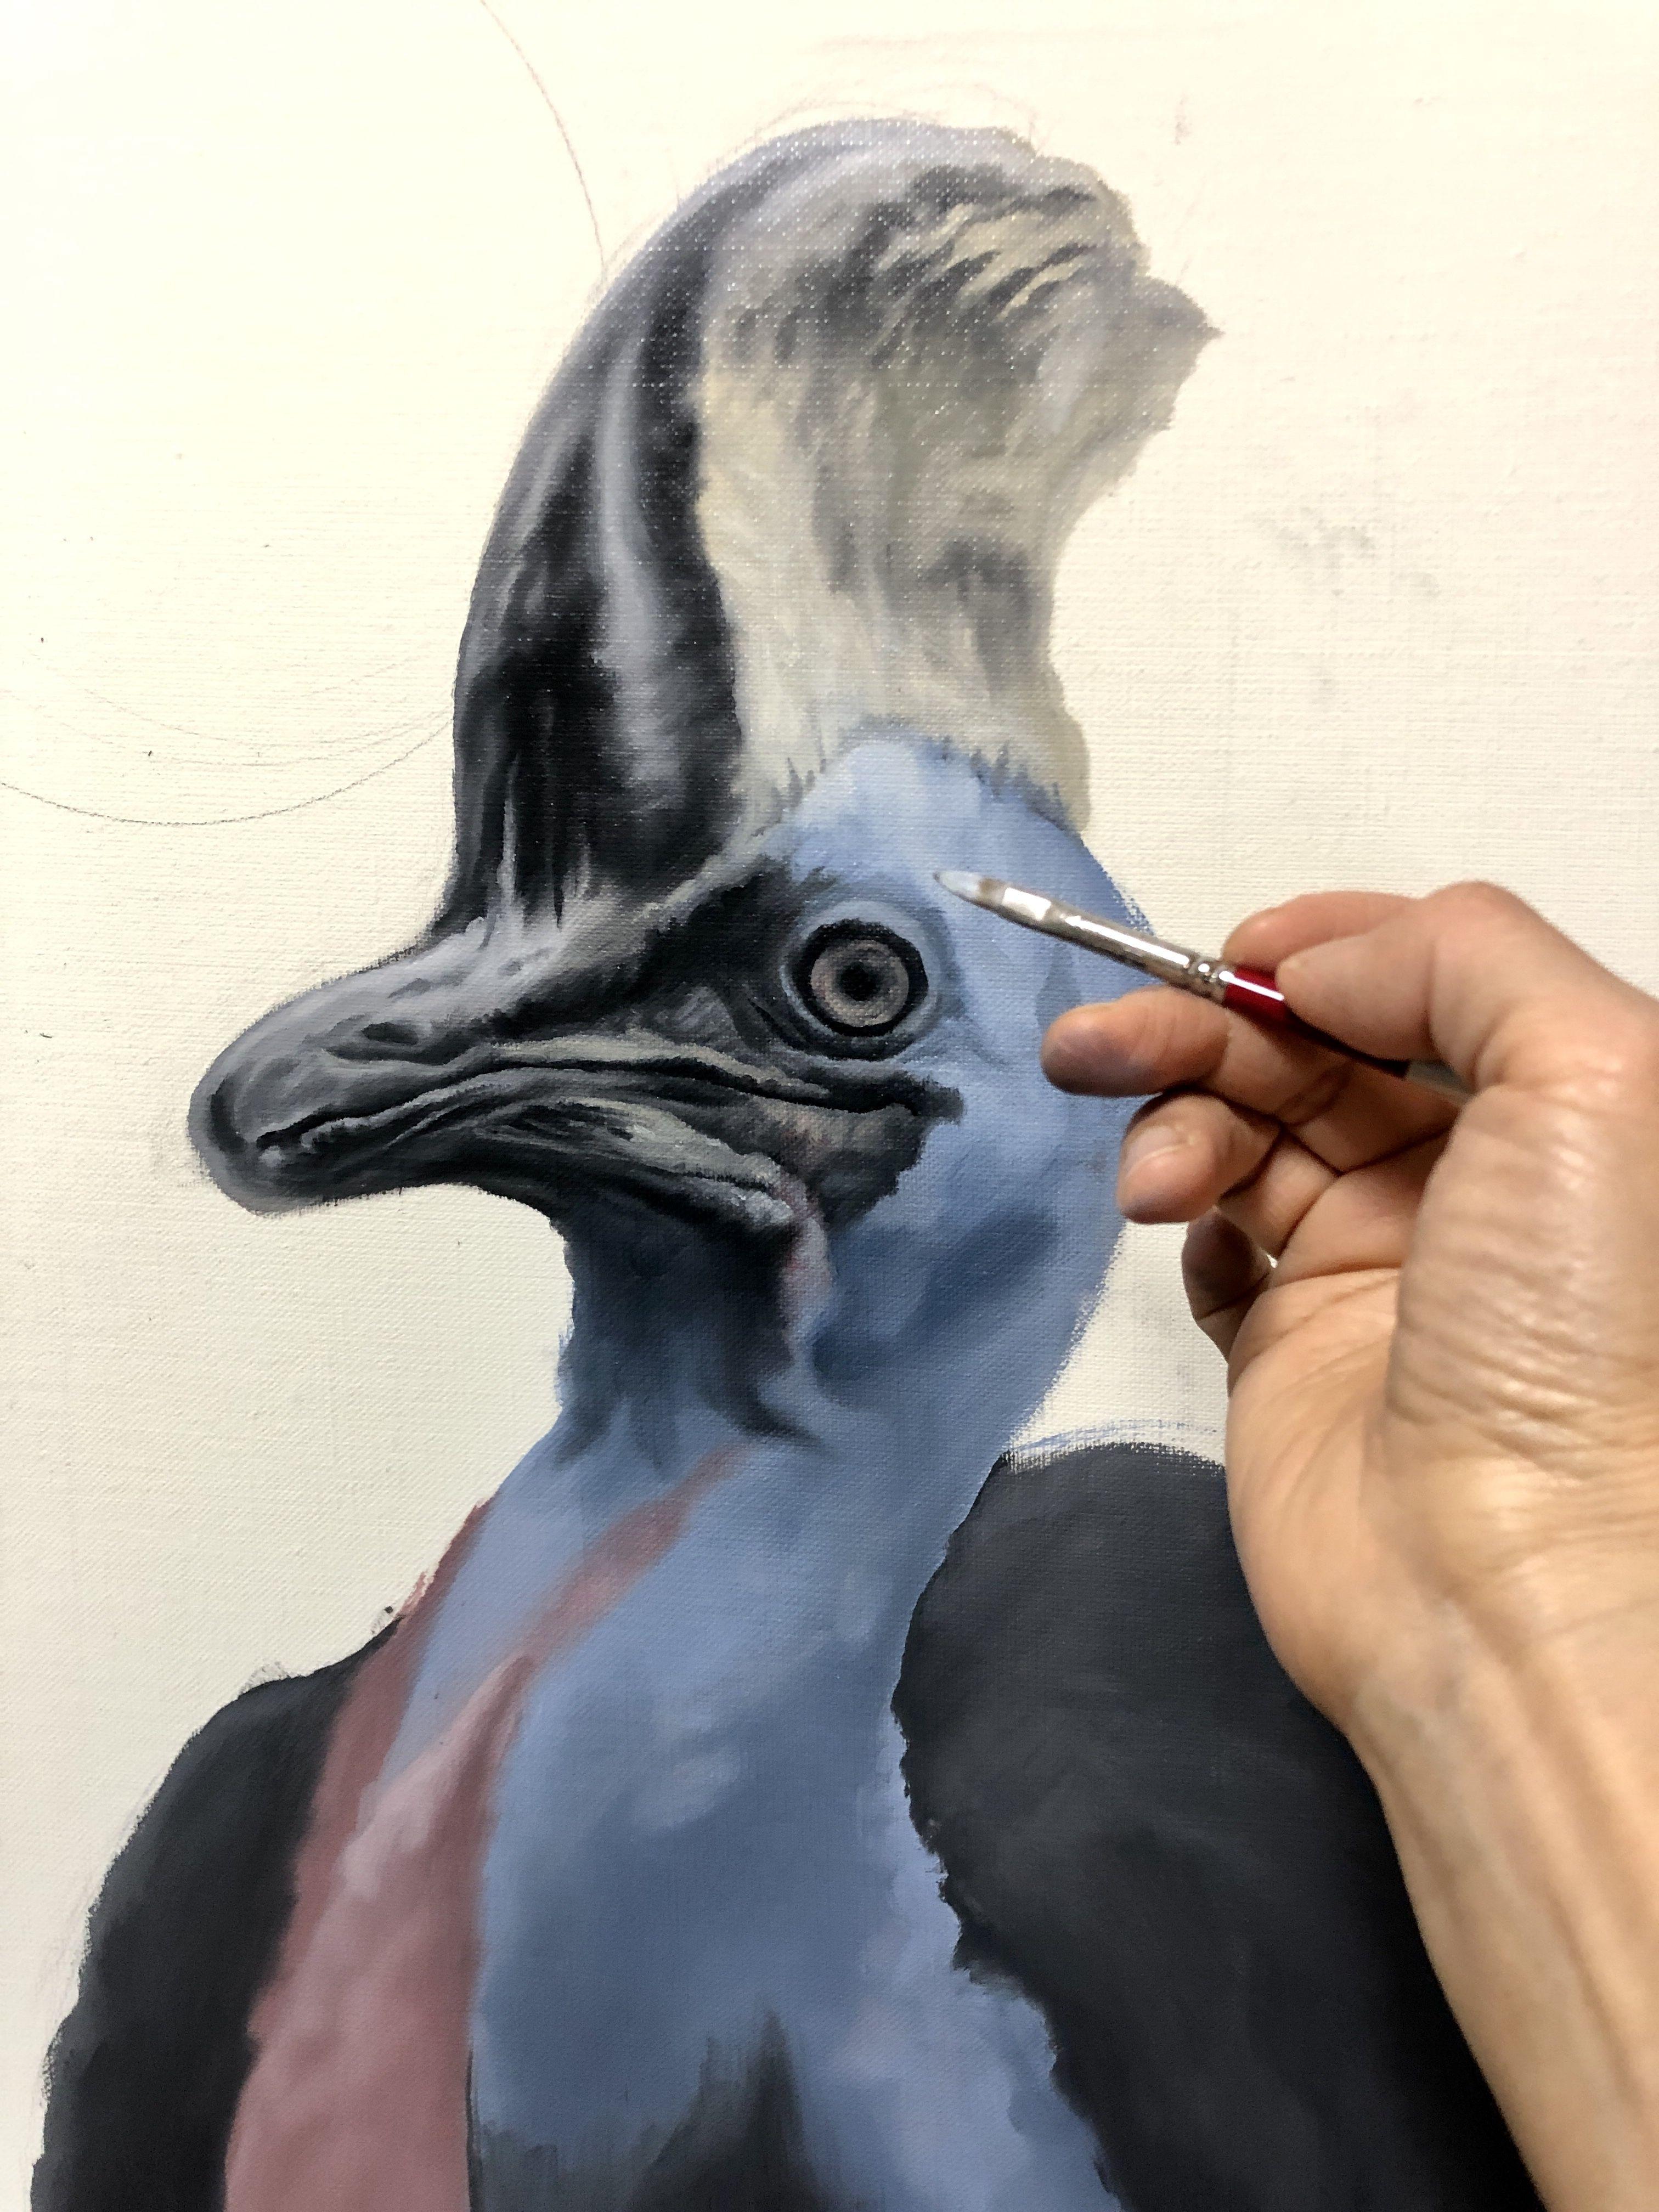 Photorealistic colorful tropical bird painting/portrait of the cassowary, also known as dinosaur bird, or one of the most dangerous birds in the world. I channel my enthusiasm for the amazing characteristics of animals by rendering them with